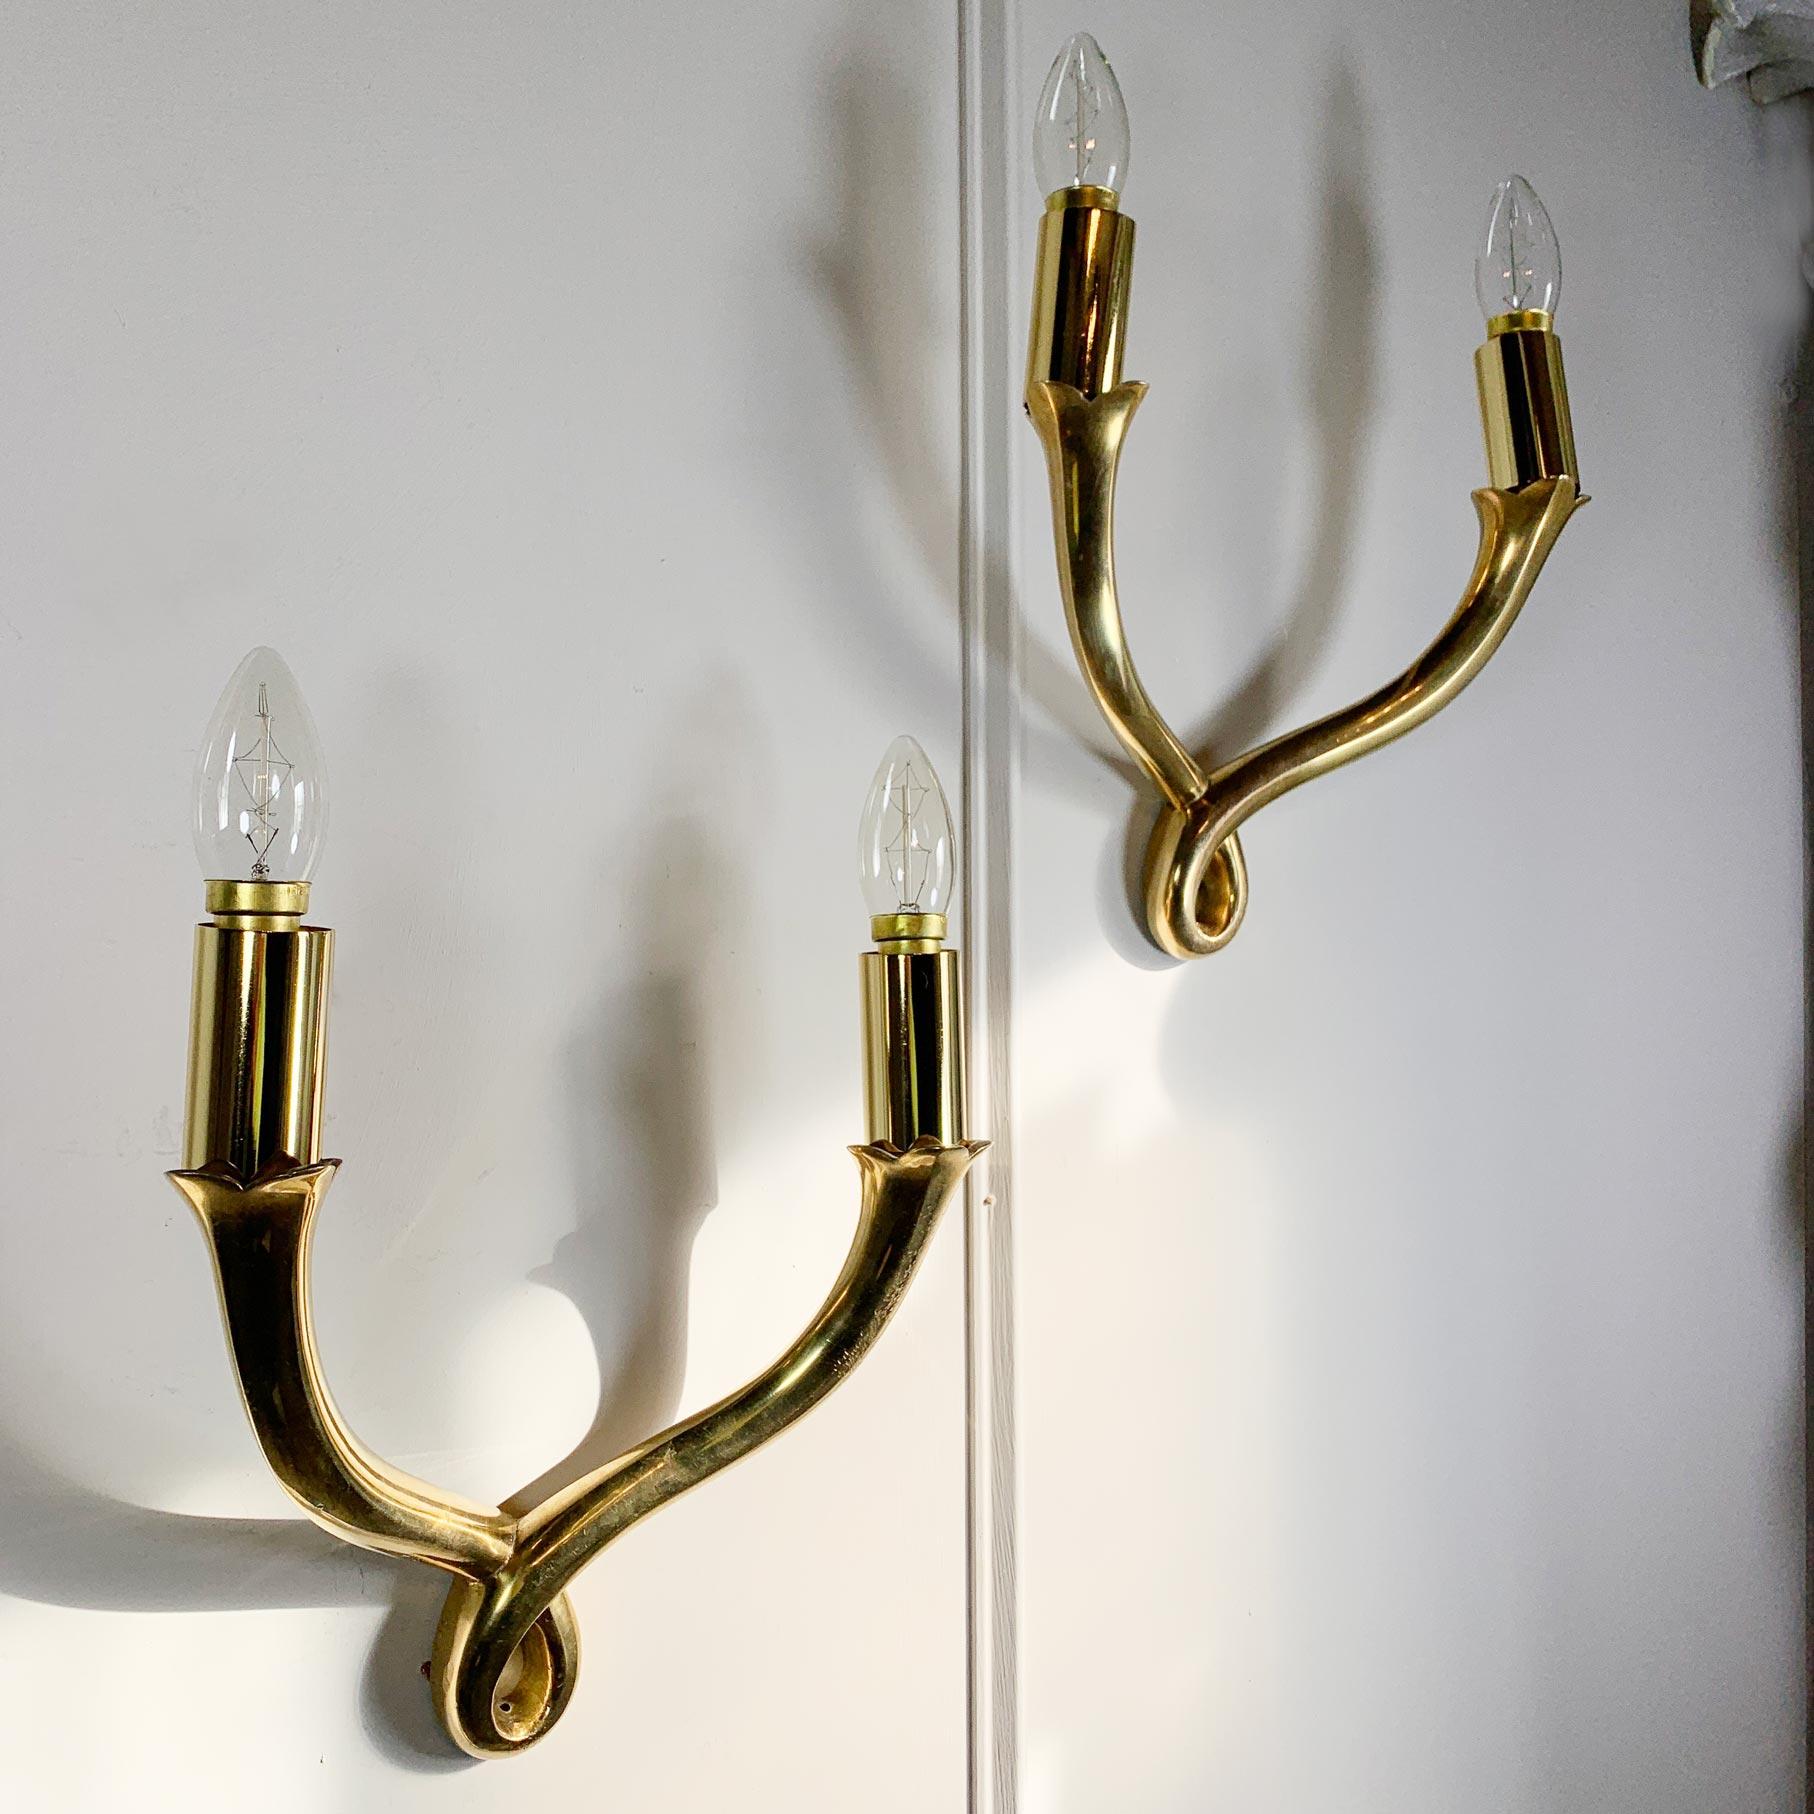 Hand-Crafted Pair of Polished Bronze Wall Lights by Riccardo Scarpa Fully Signed